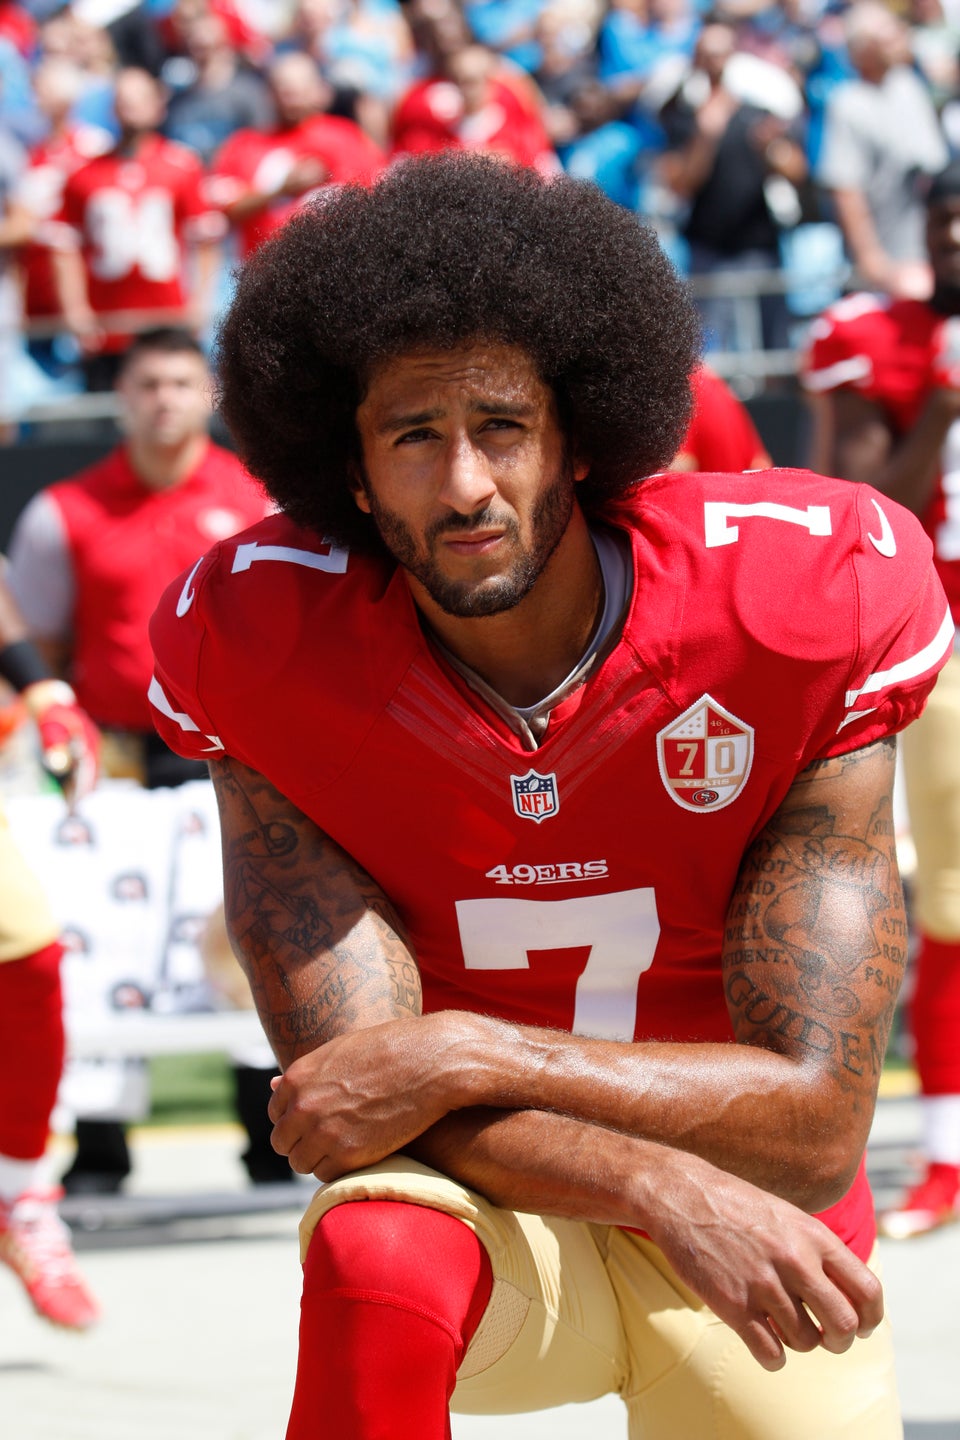 Colin Kaepernick Plans To Take ‘Know Your Rights’ Camp Nationwide